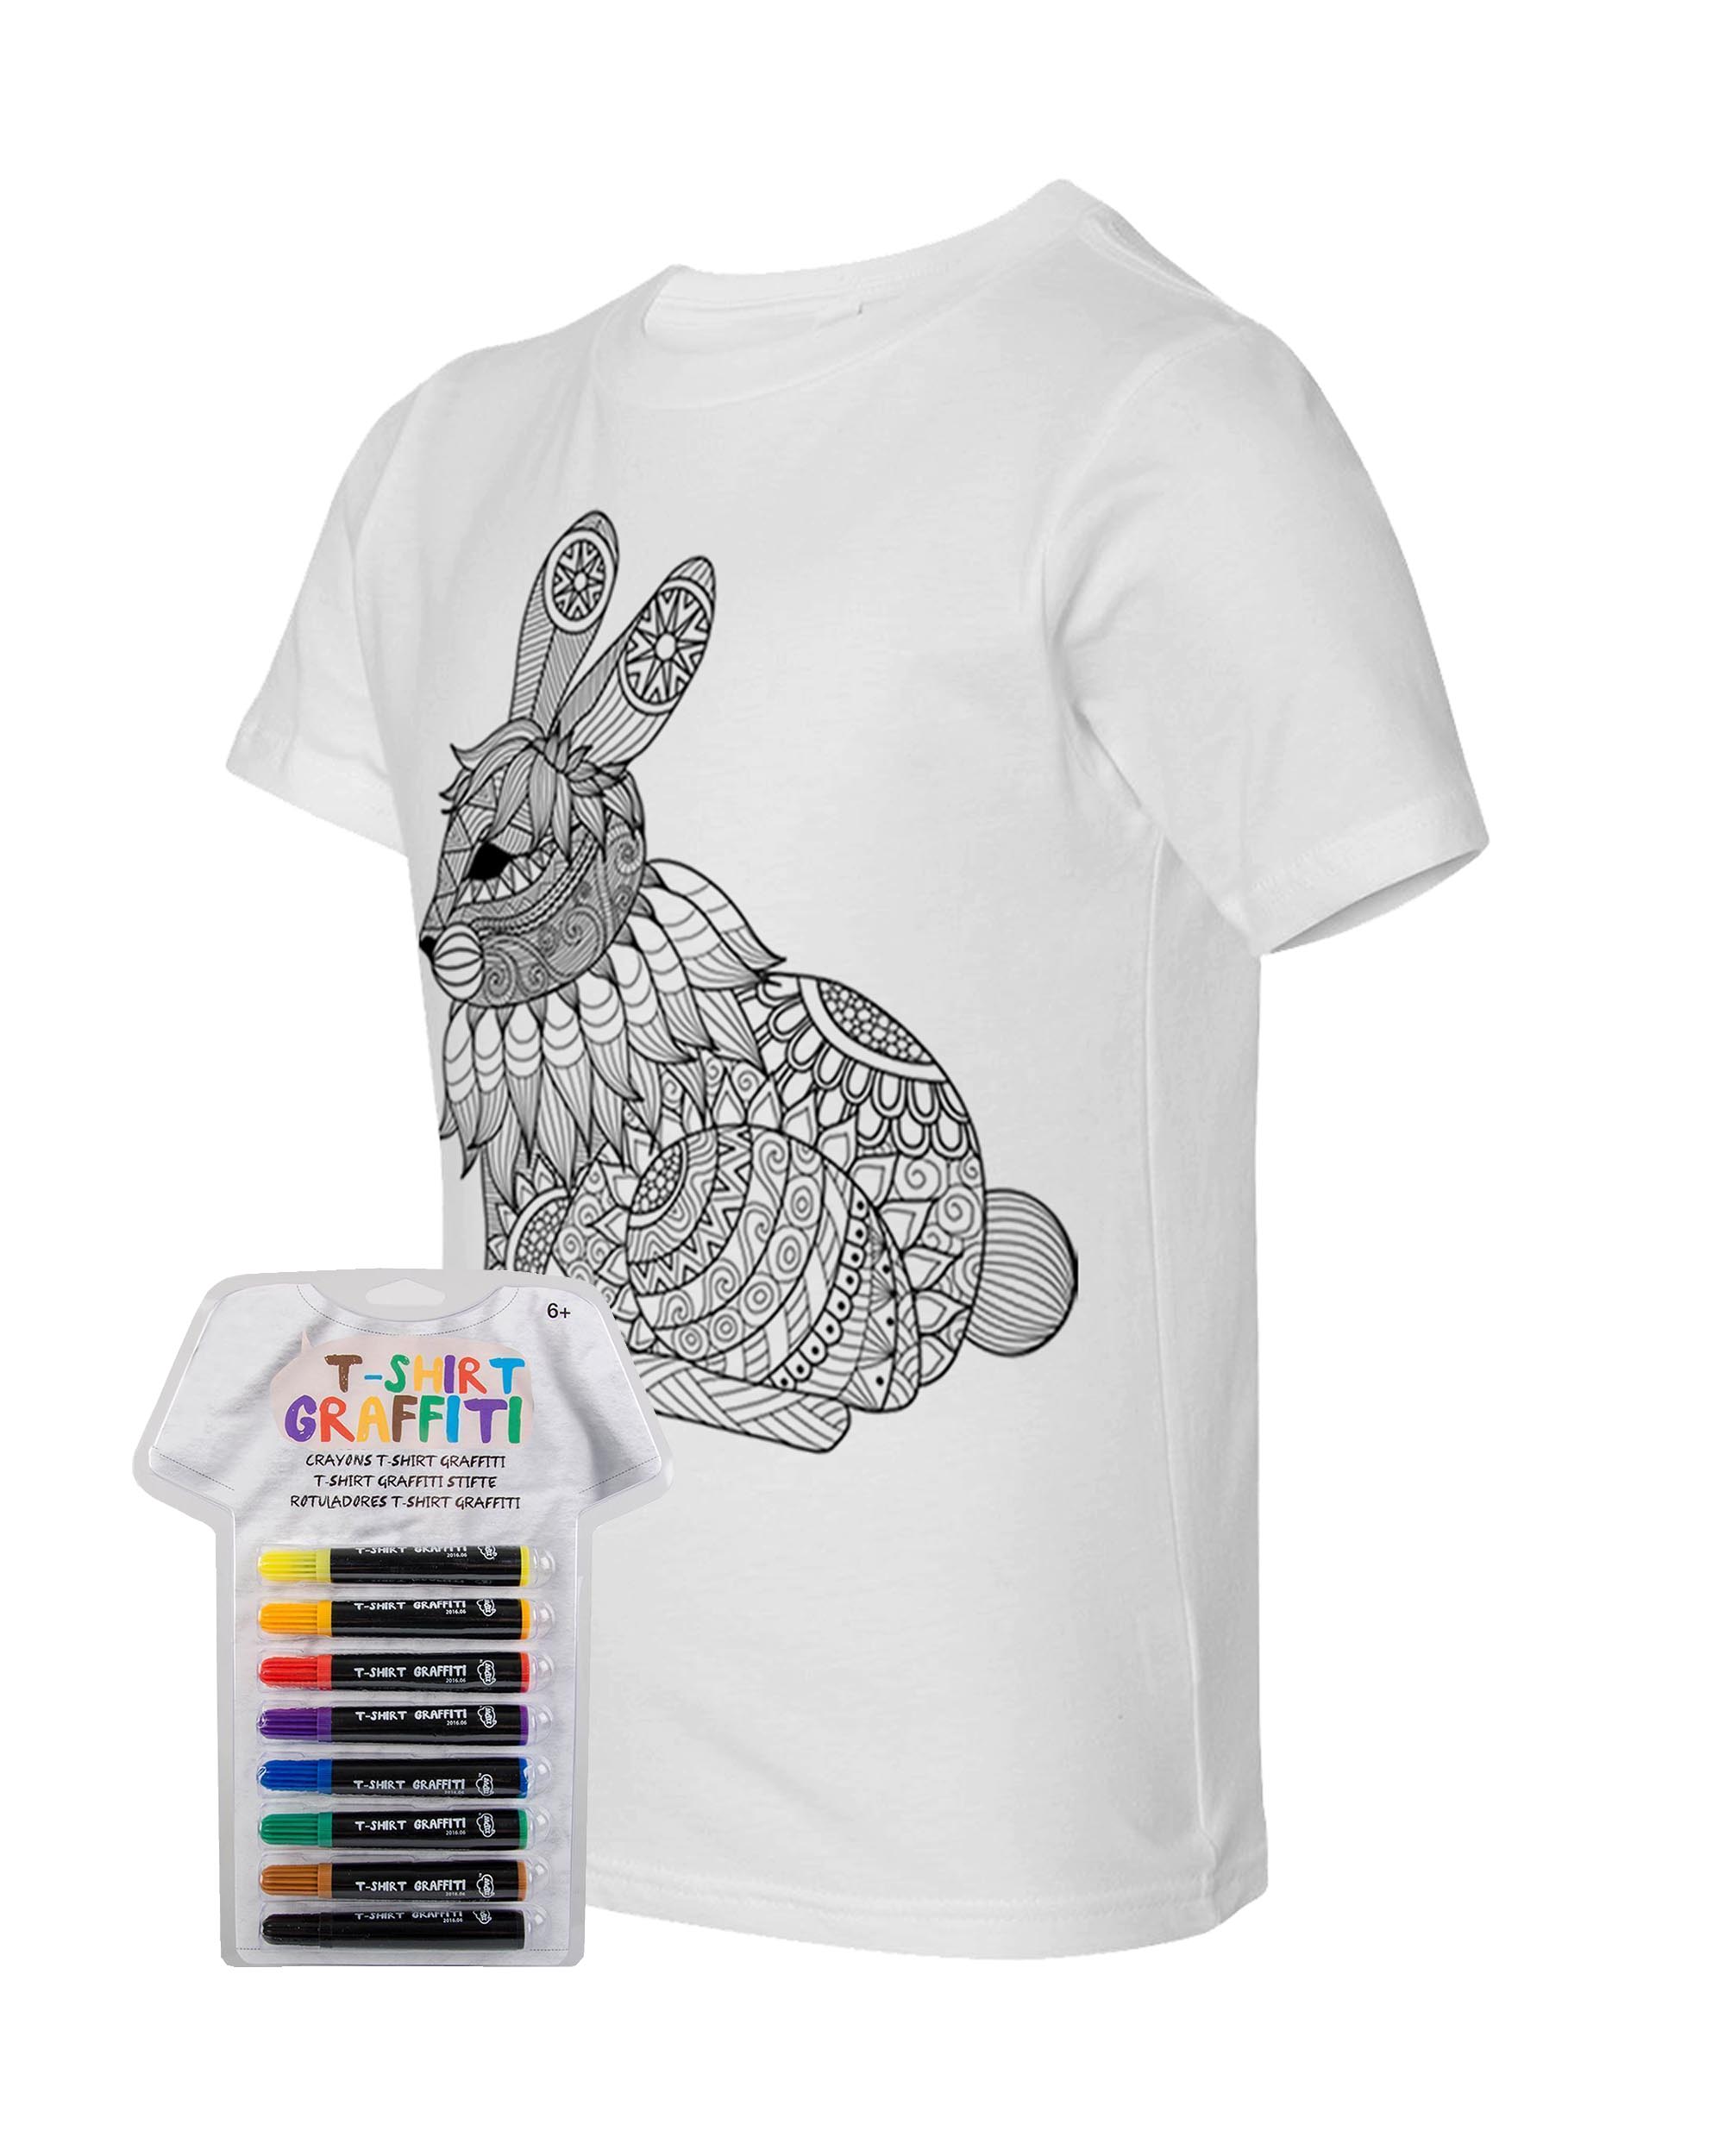 Kid's Coloring Bunny White T Shirt With Fabric Markers - Adorned By You